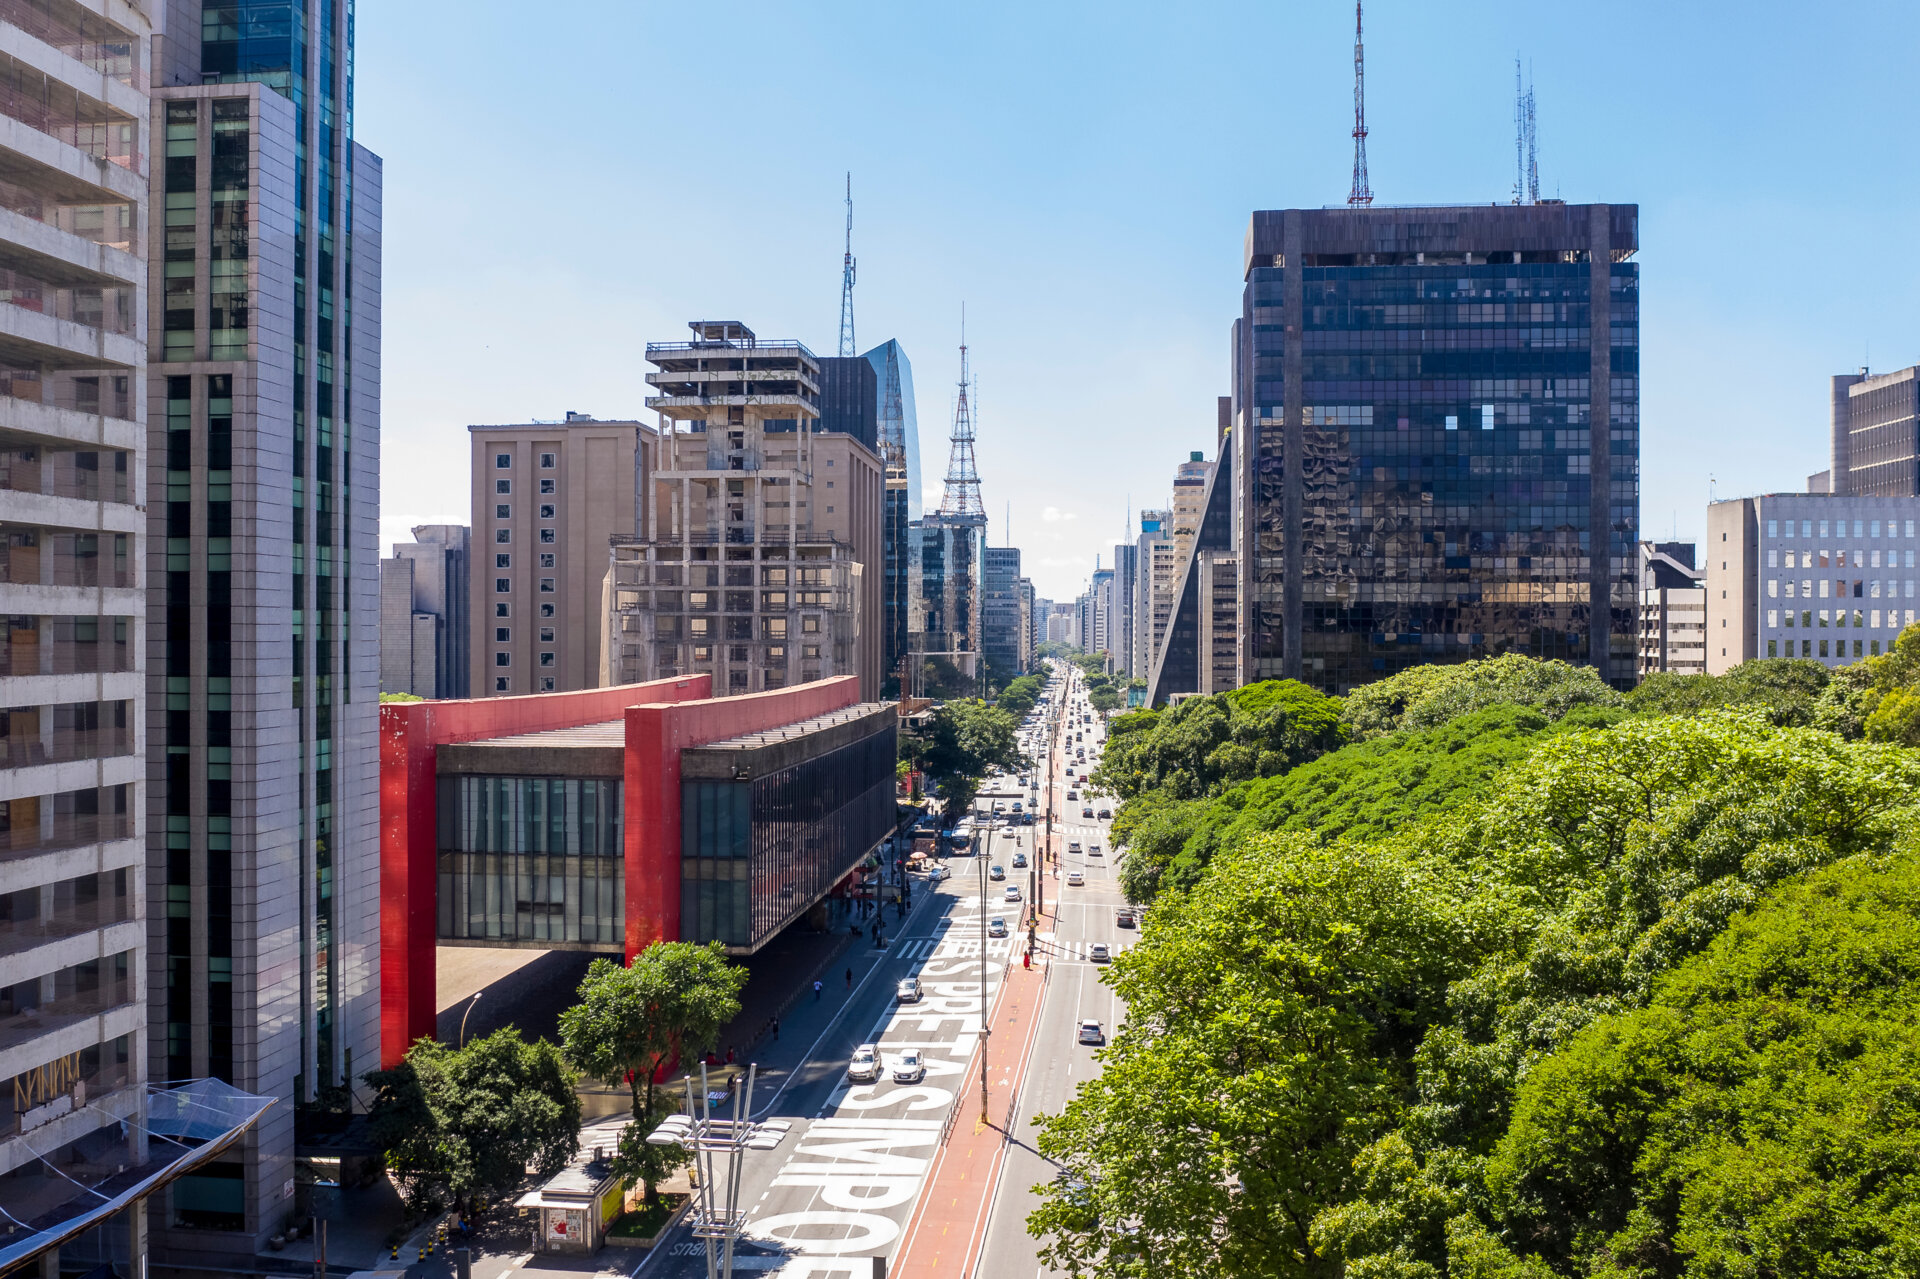 Paulista avenue, financial center of Sao Paulo and Brazil and MASP seen from above with its commercial buildings and intense movement of people and cars